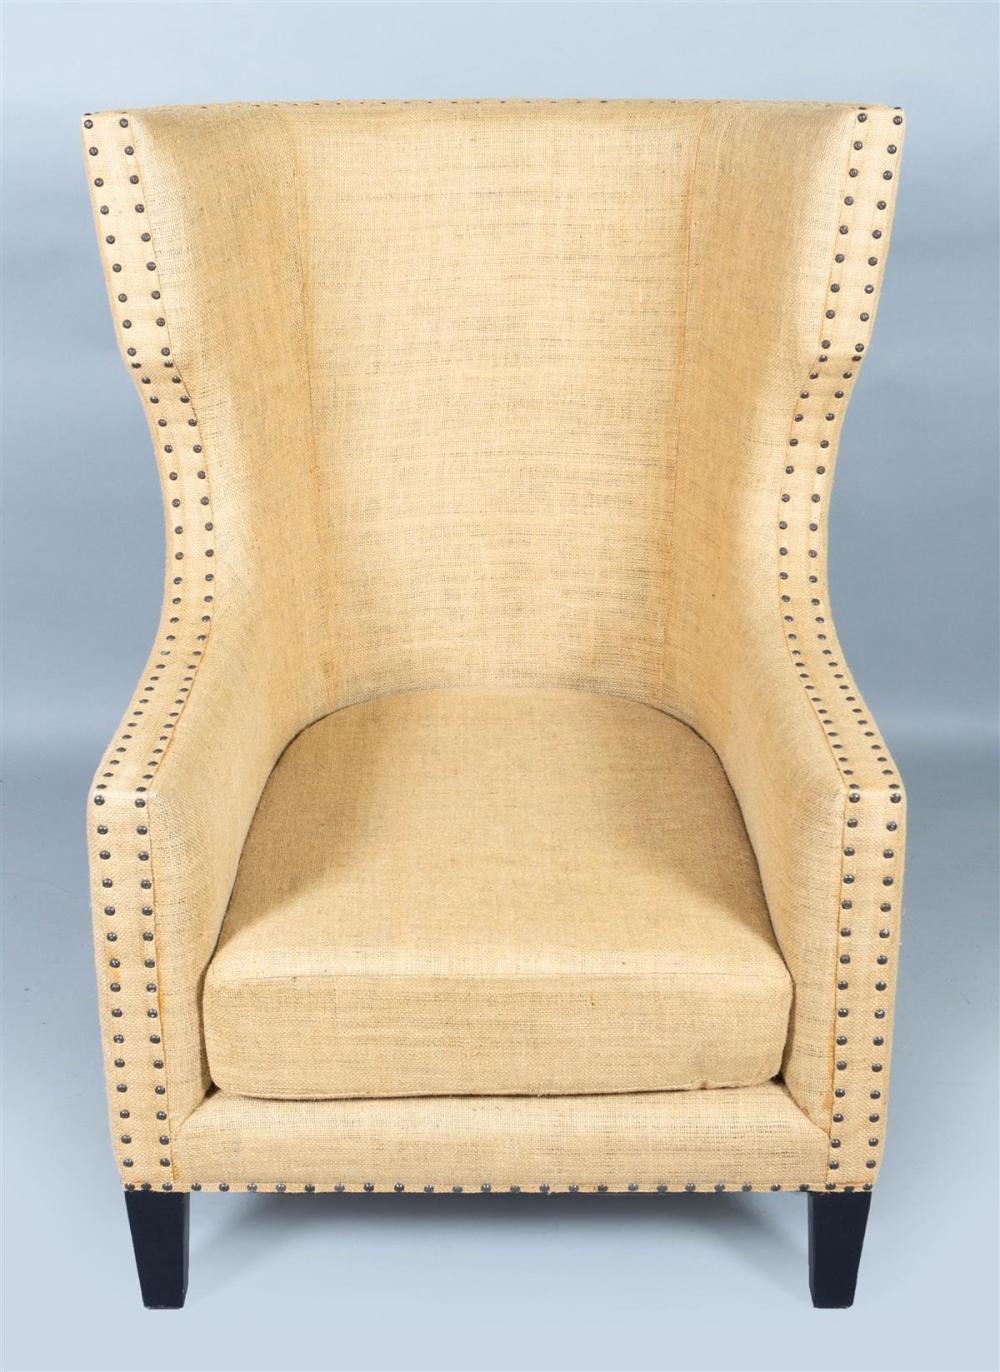 CONTEMPORARY UPHOLSTERED WING ARMCHAIRCONTEMPORARY 33befb